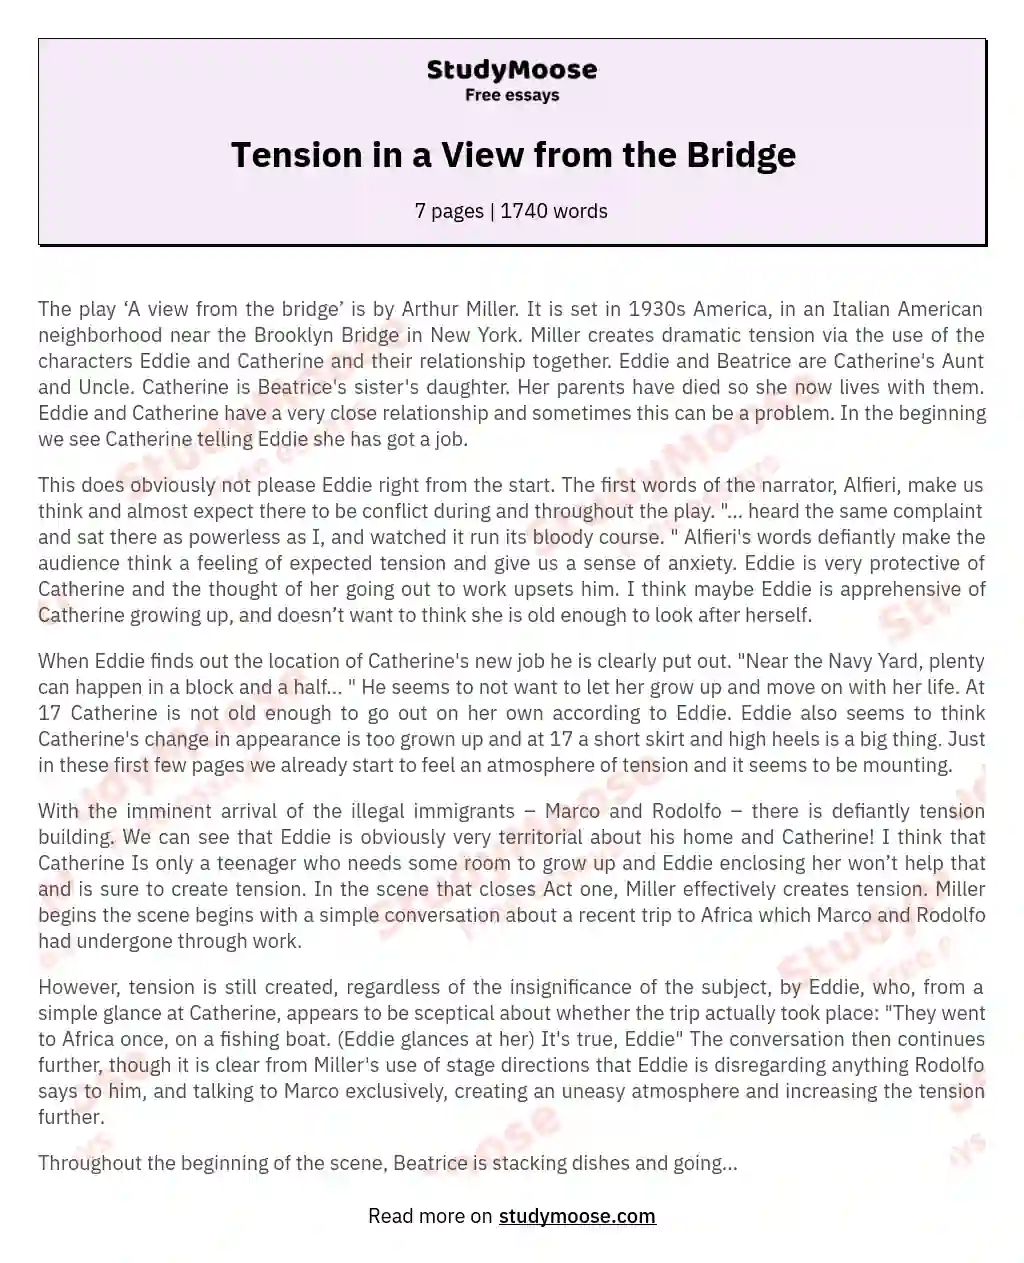 Tension in a View from the Bridge essay